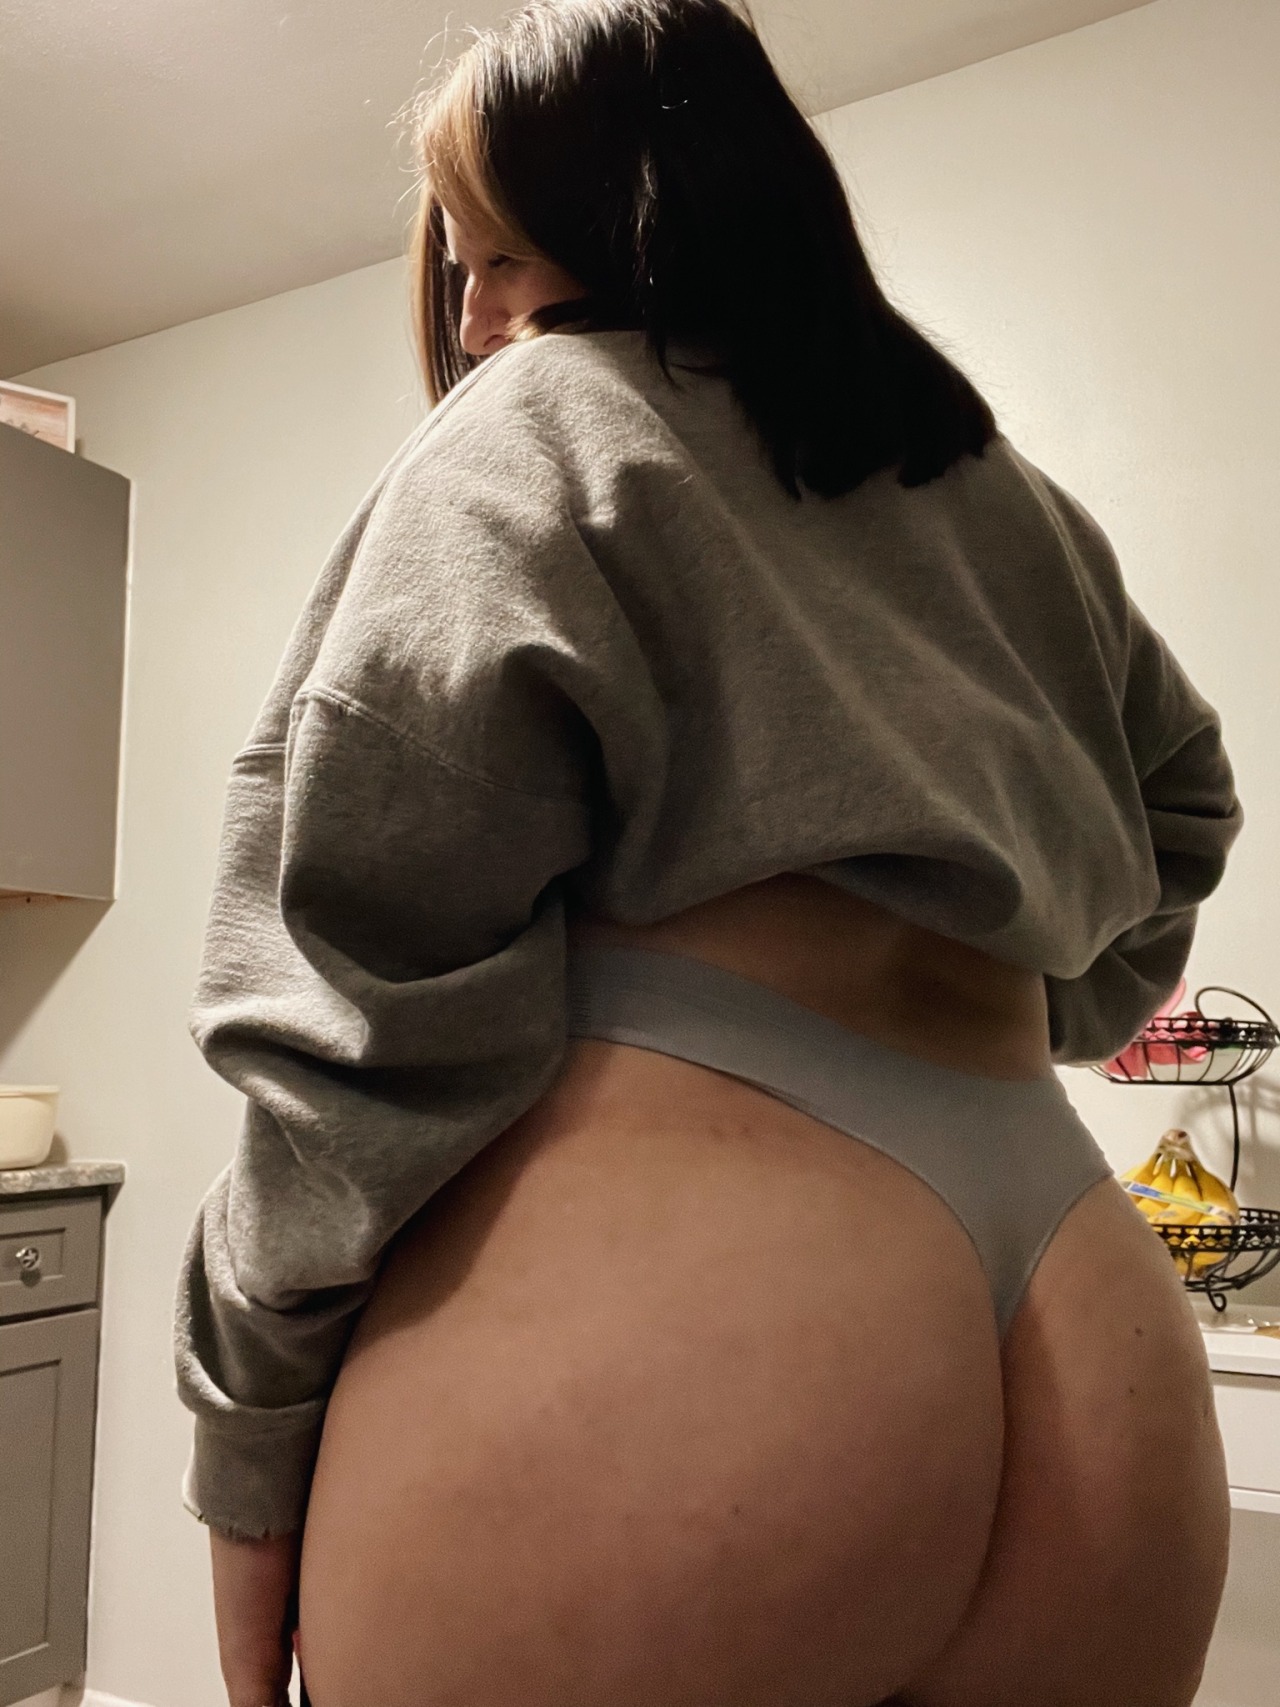 miidnightrider:pov: taking pictures of my ass in the kitchen while i make you dinner🥵👅https://onlyfans.com/midnightmadsOnlyFans